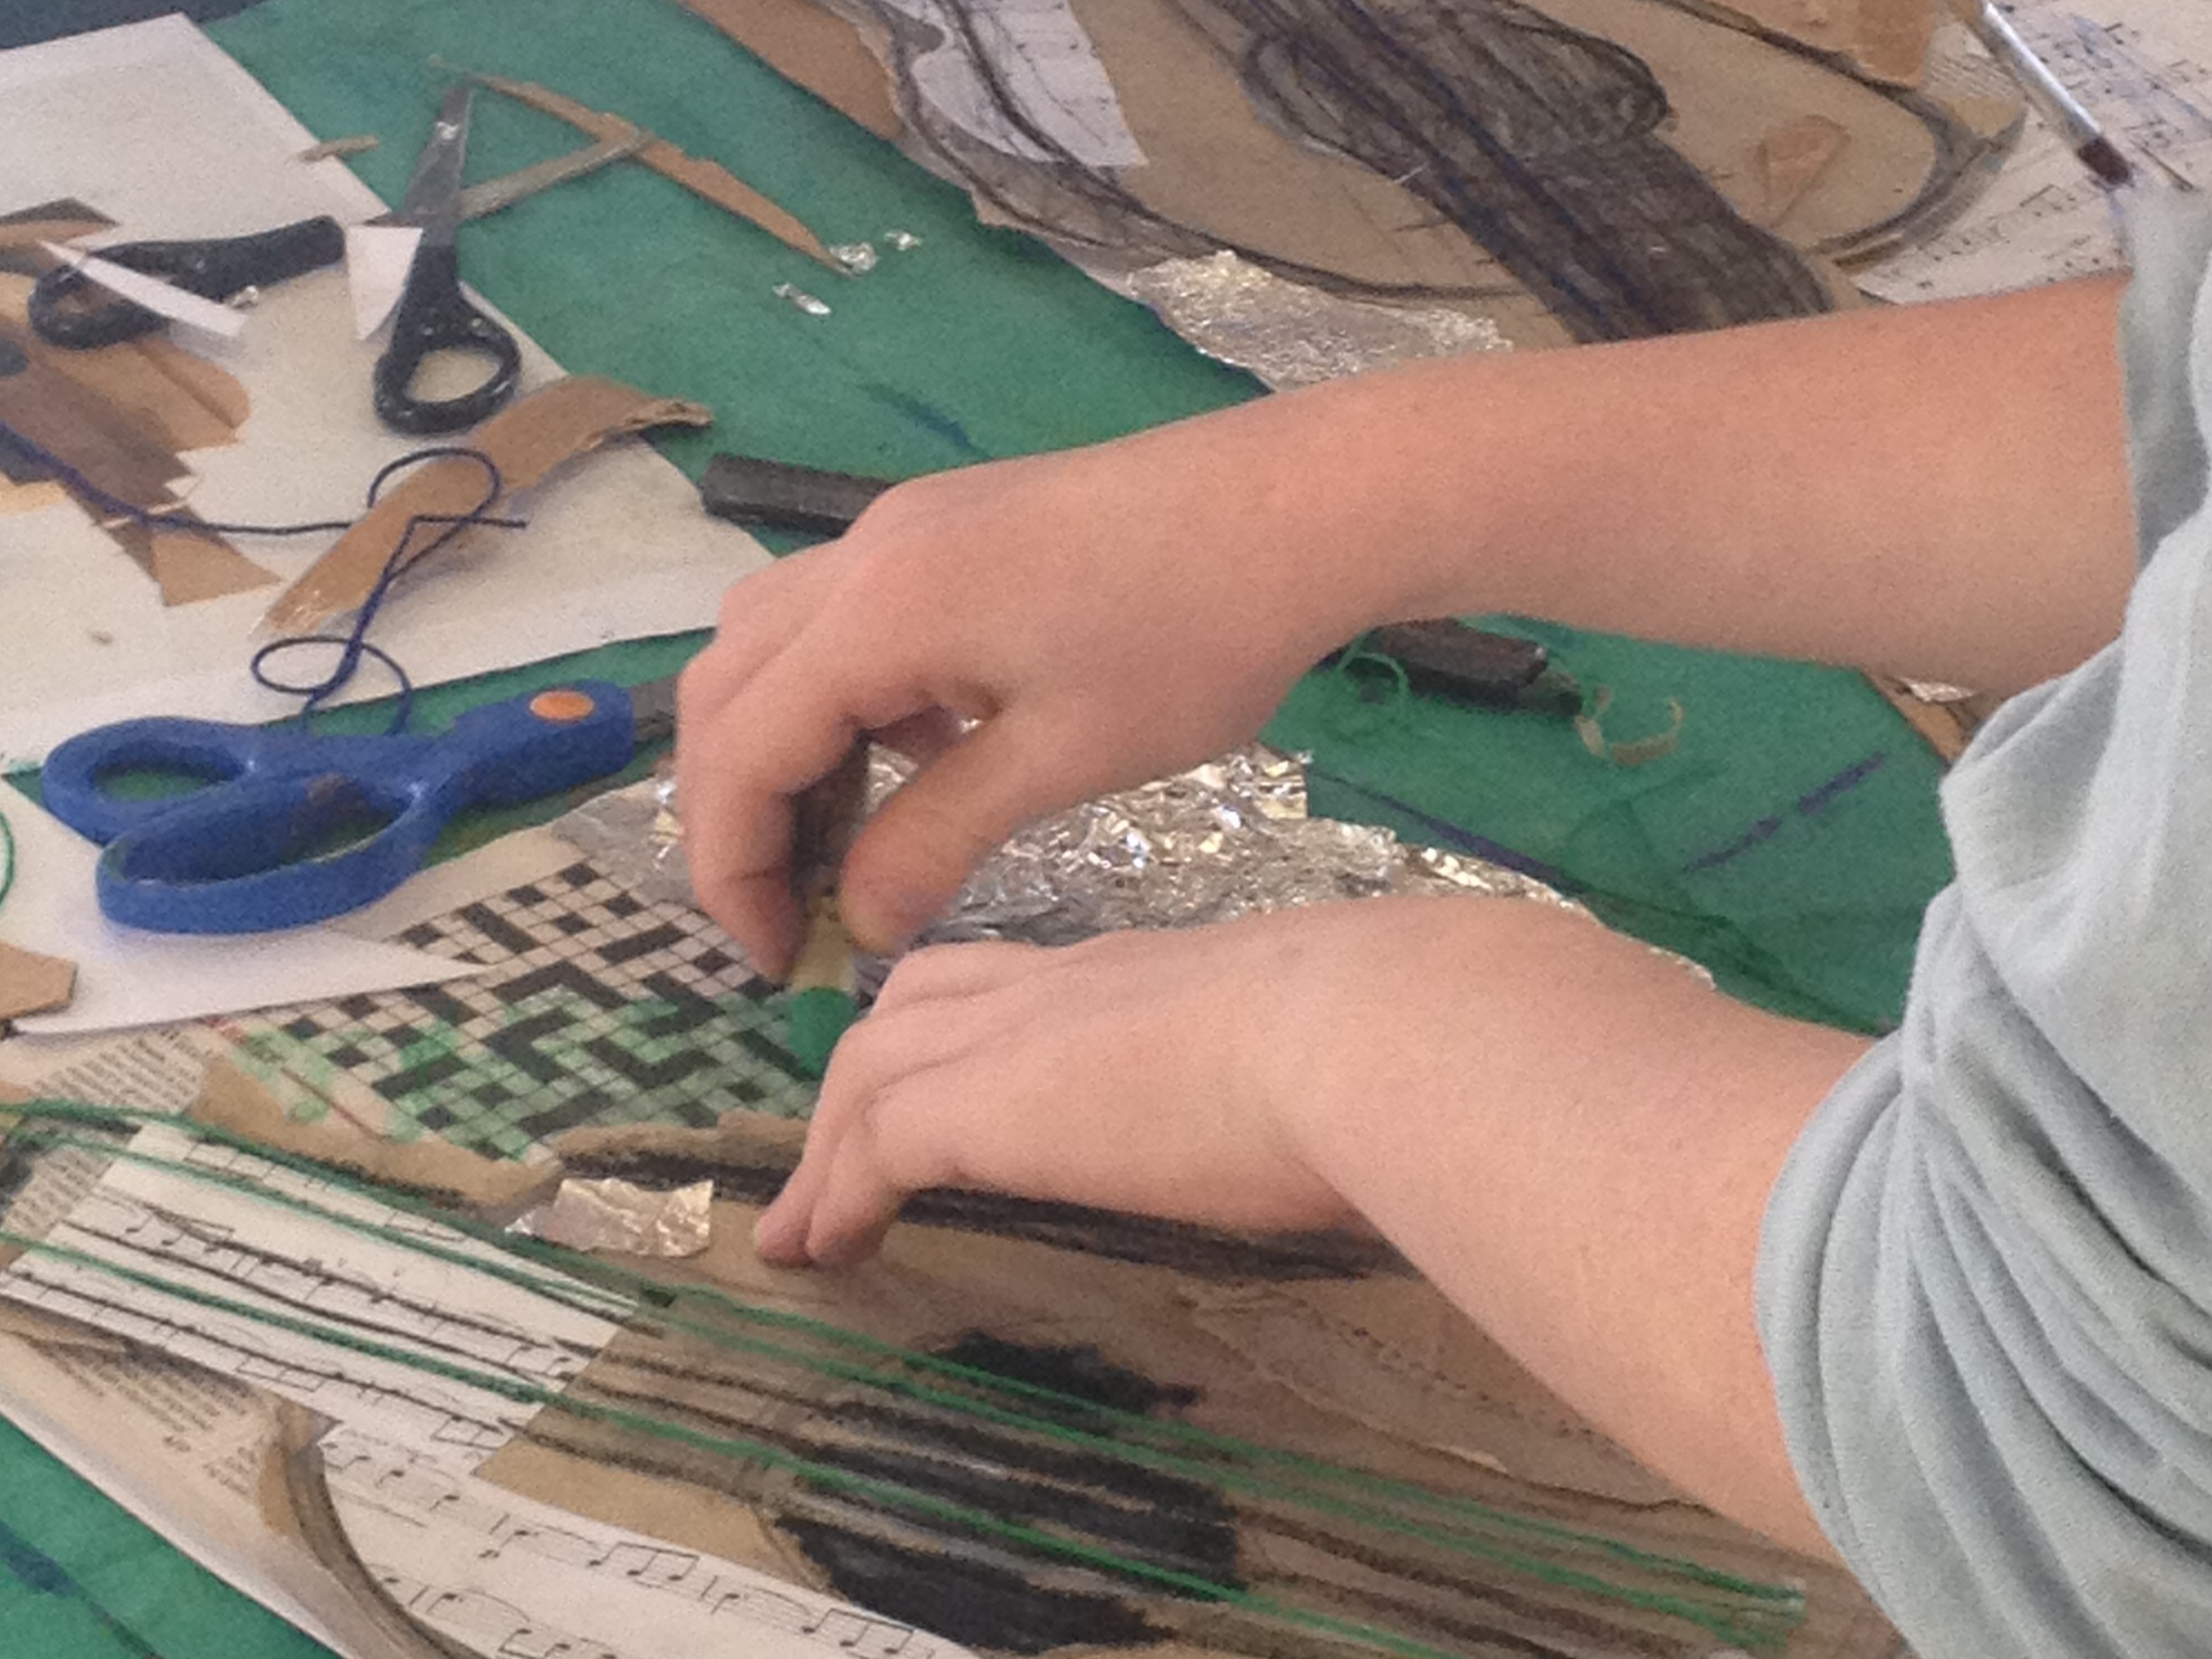 student hands at table creating artwork 